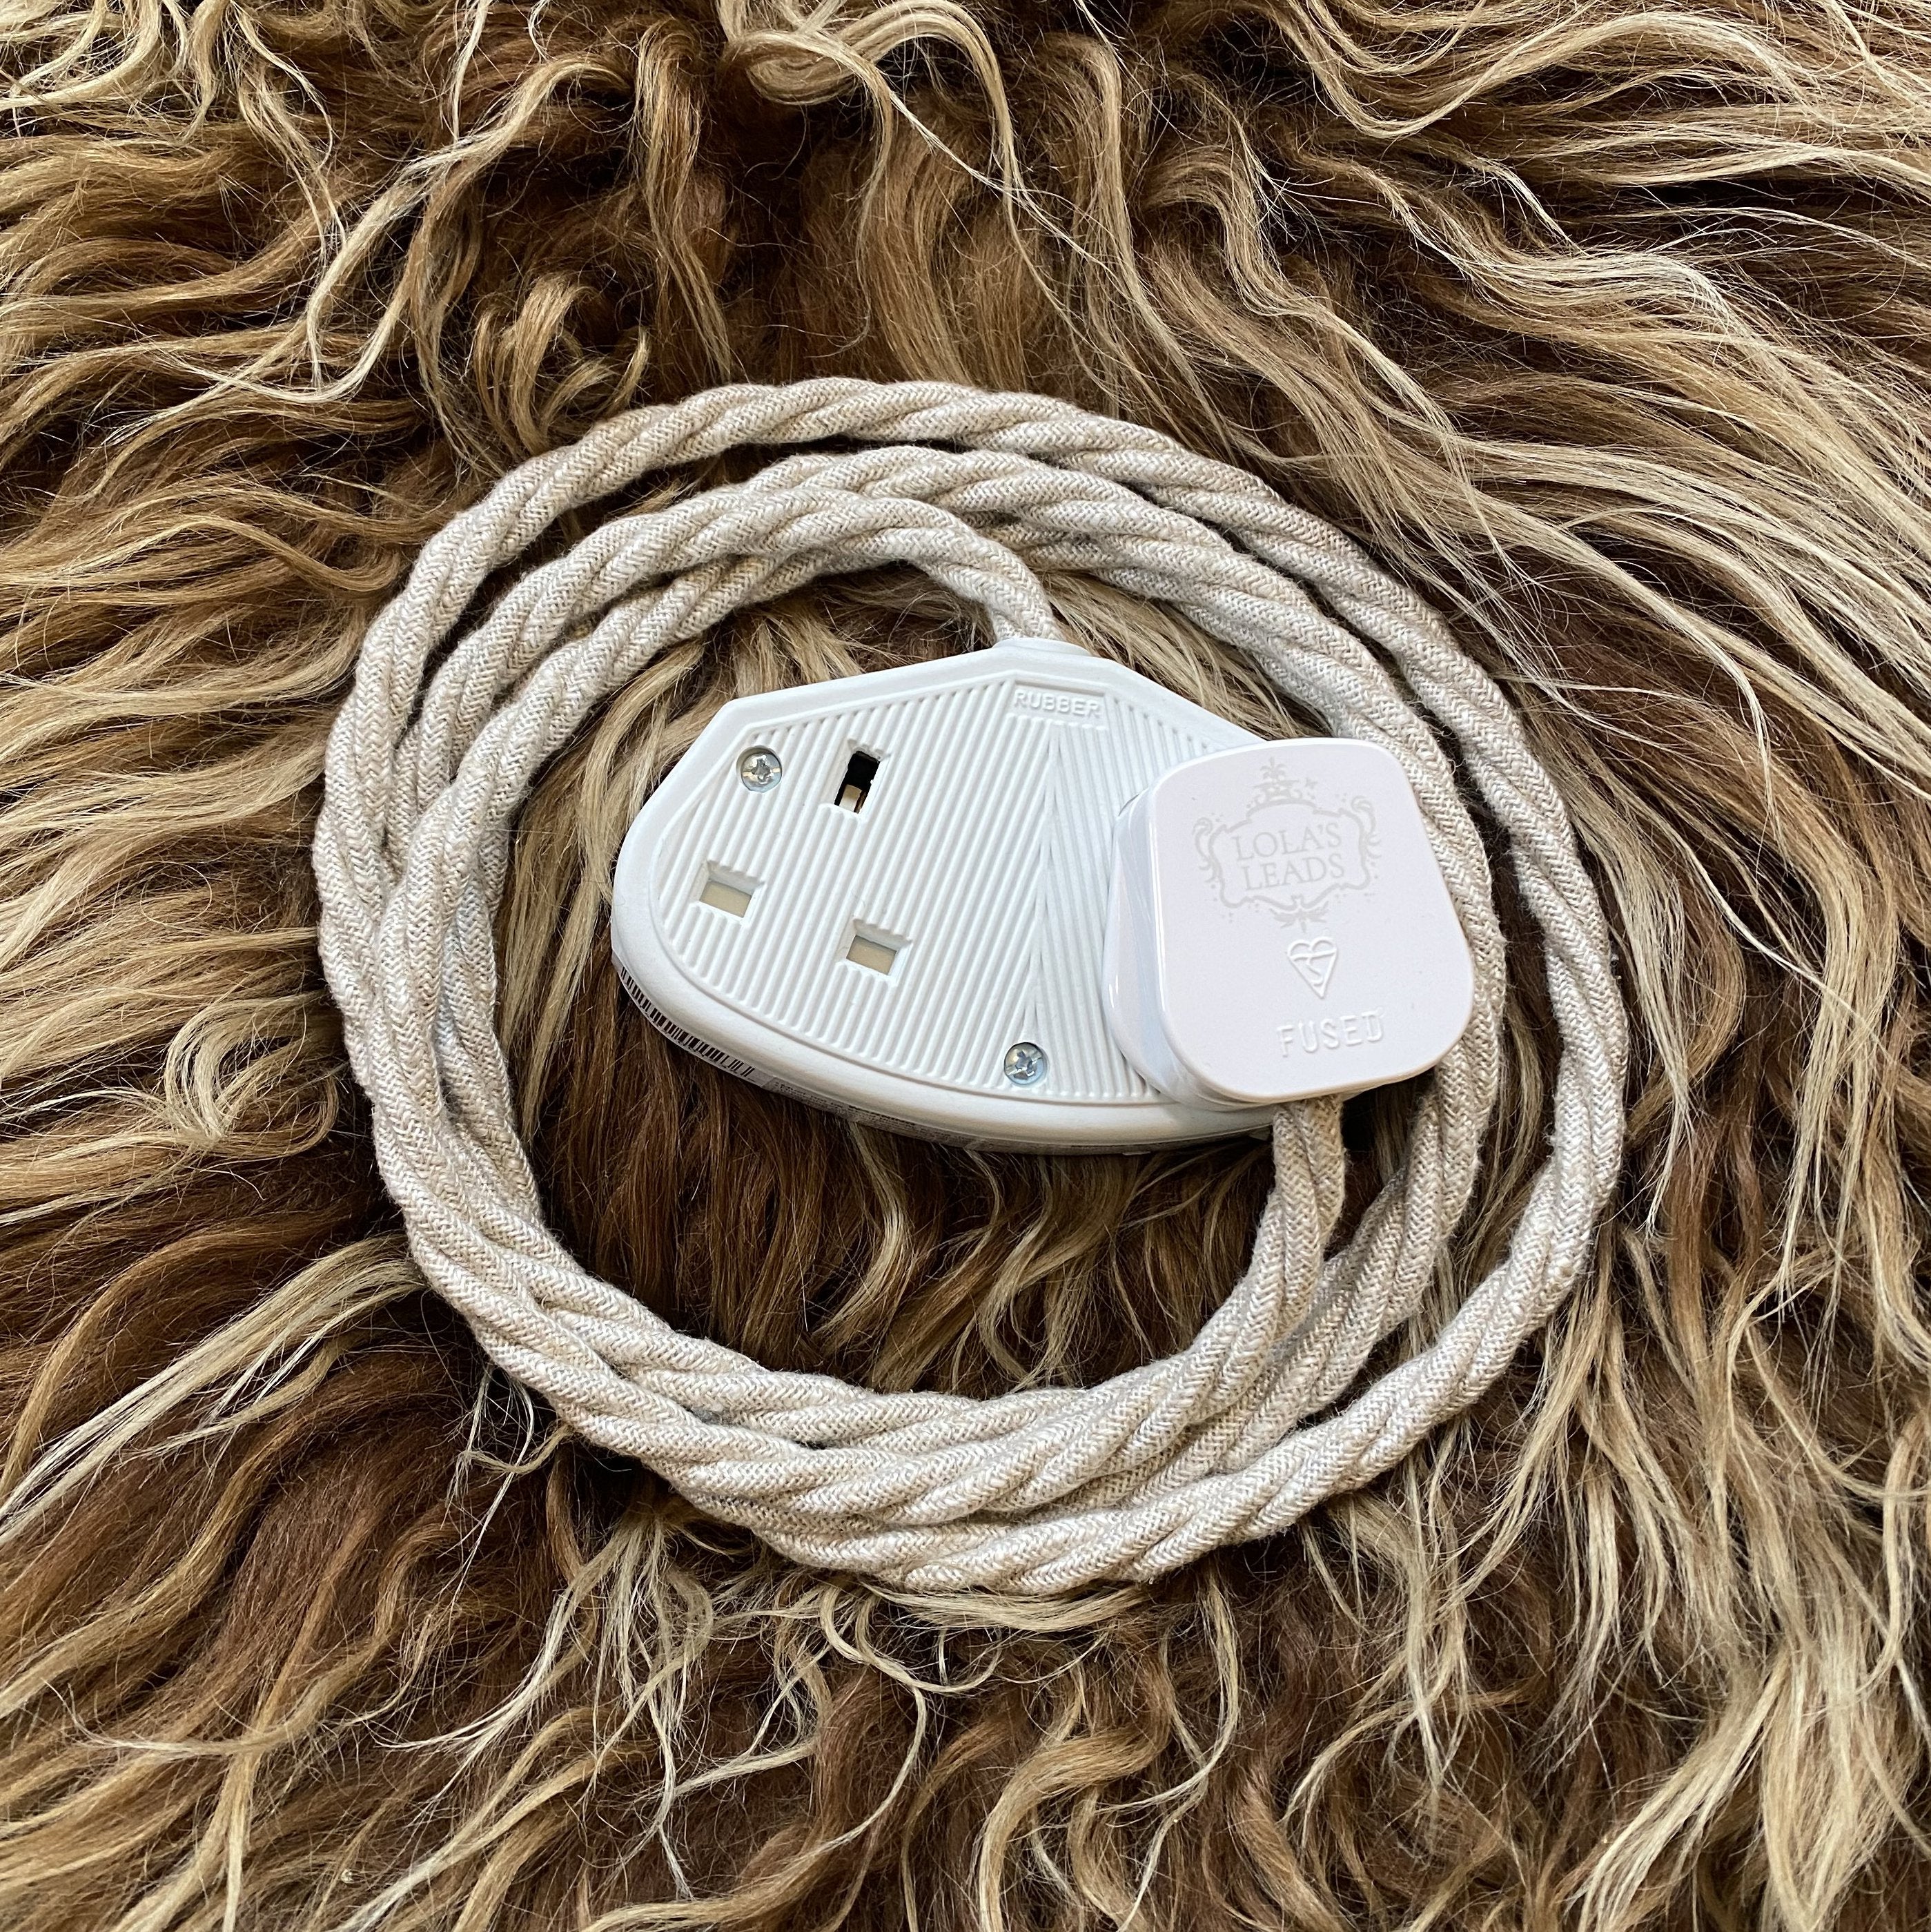 Lola's Leads Oatmeal Cream Linen Fabric Covered Extension Cable